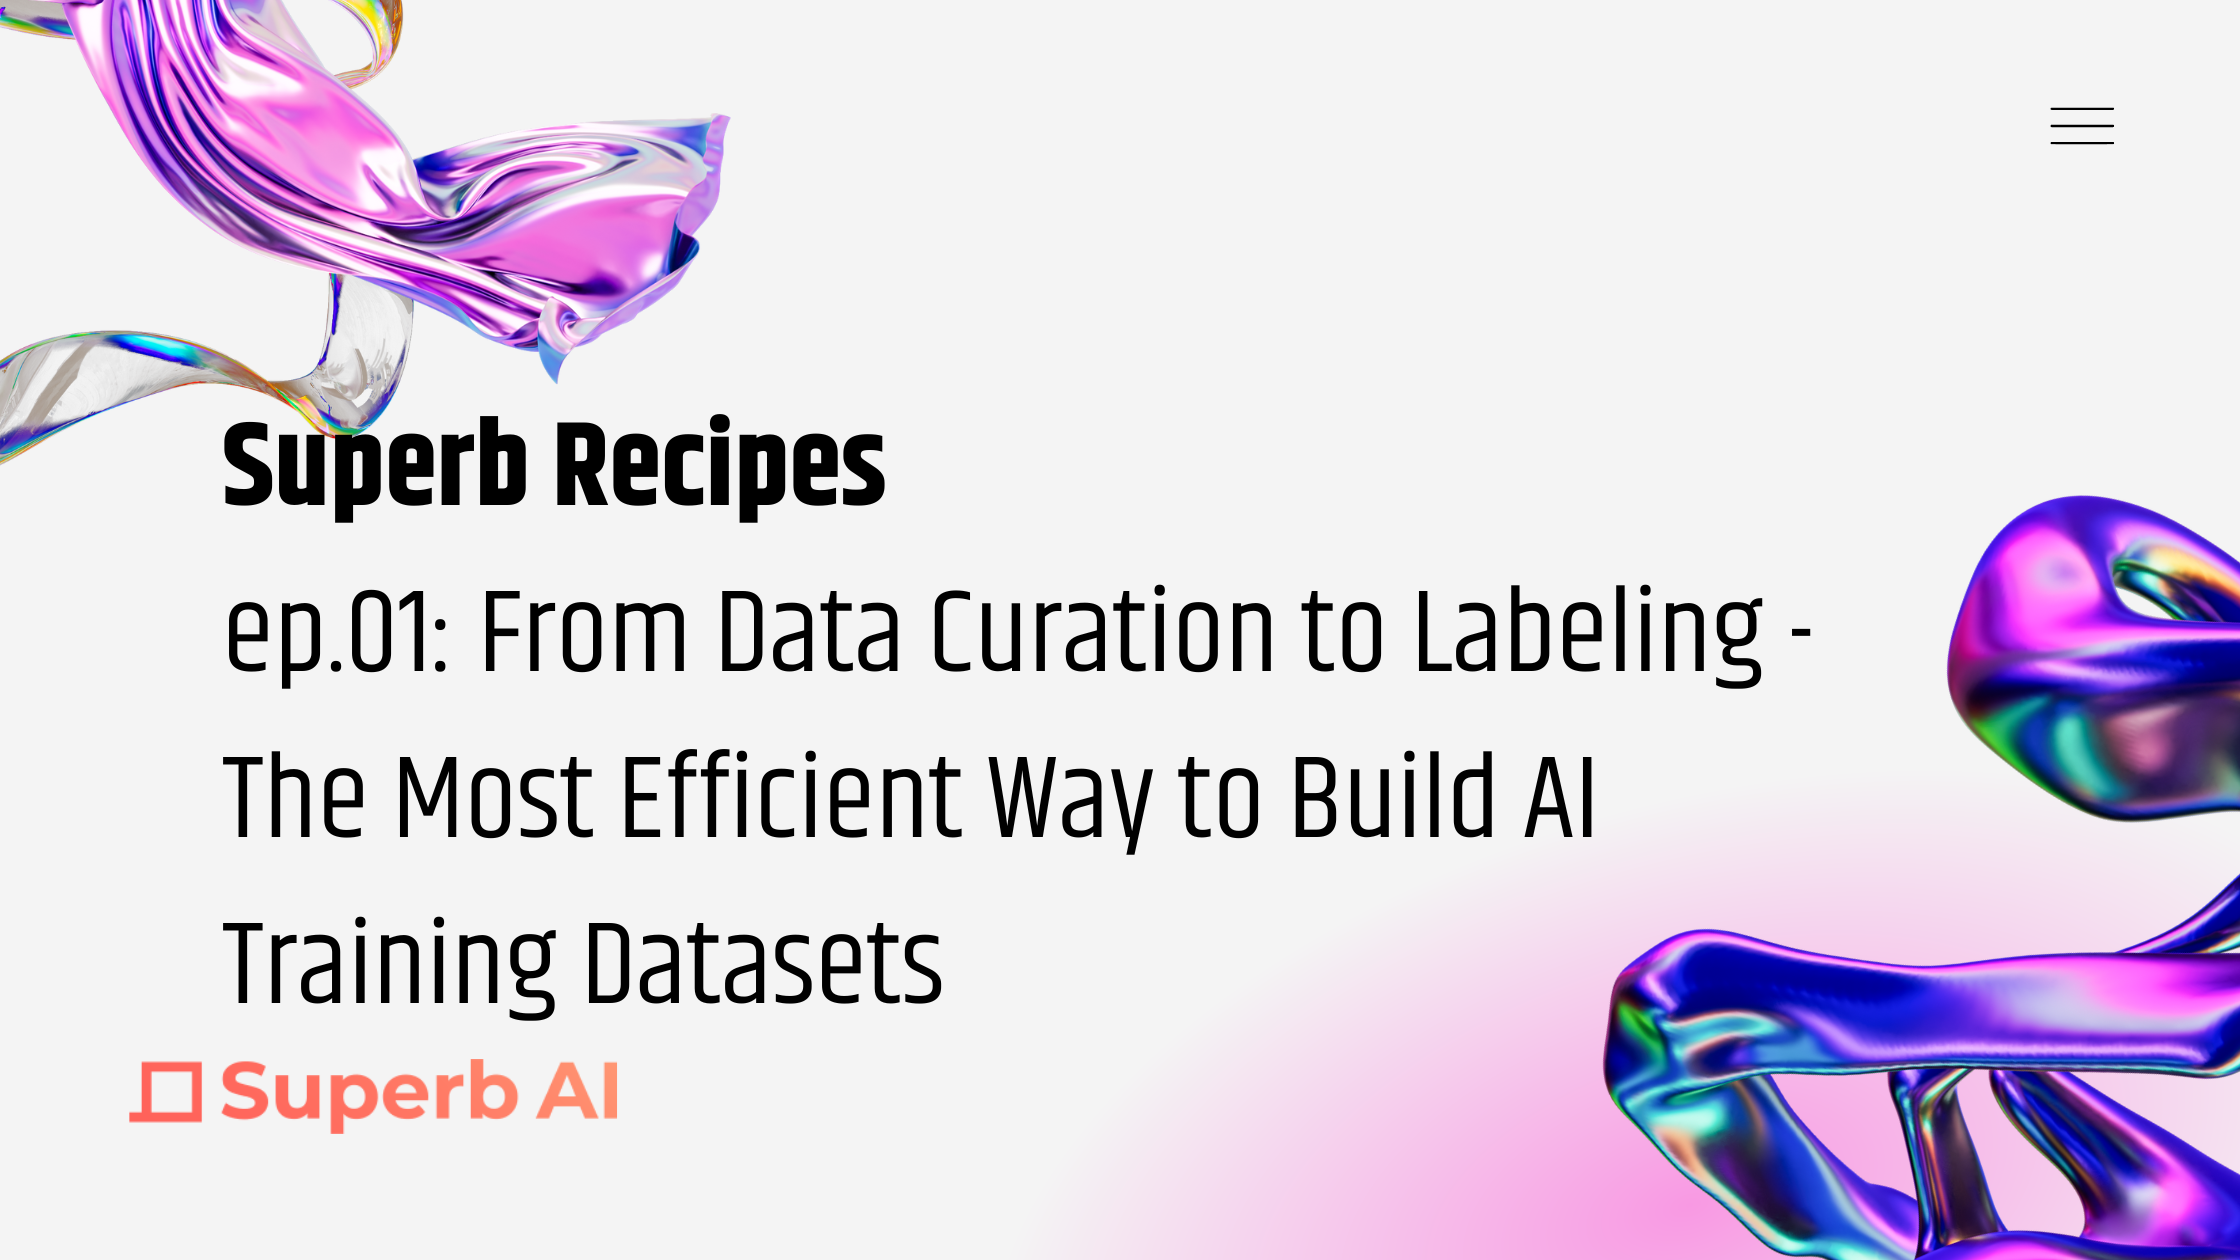 No Need to Label Everything Anymore - Label Only the Data You Need.